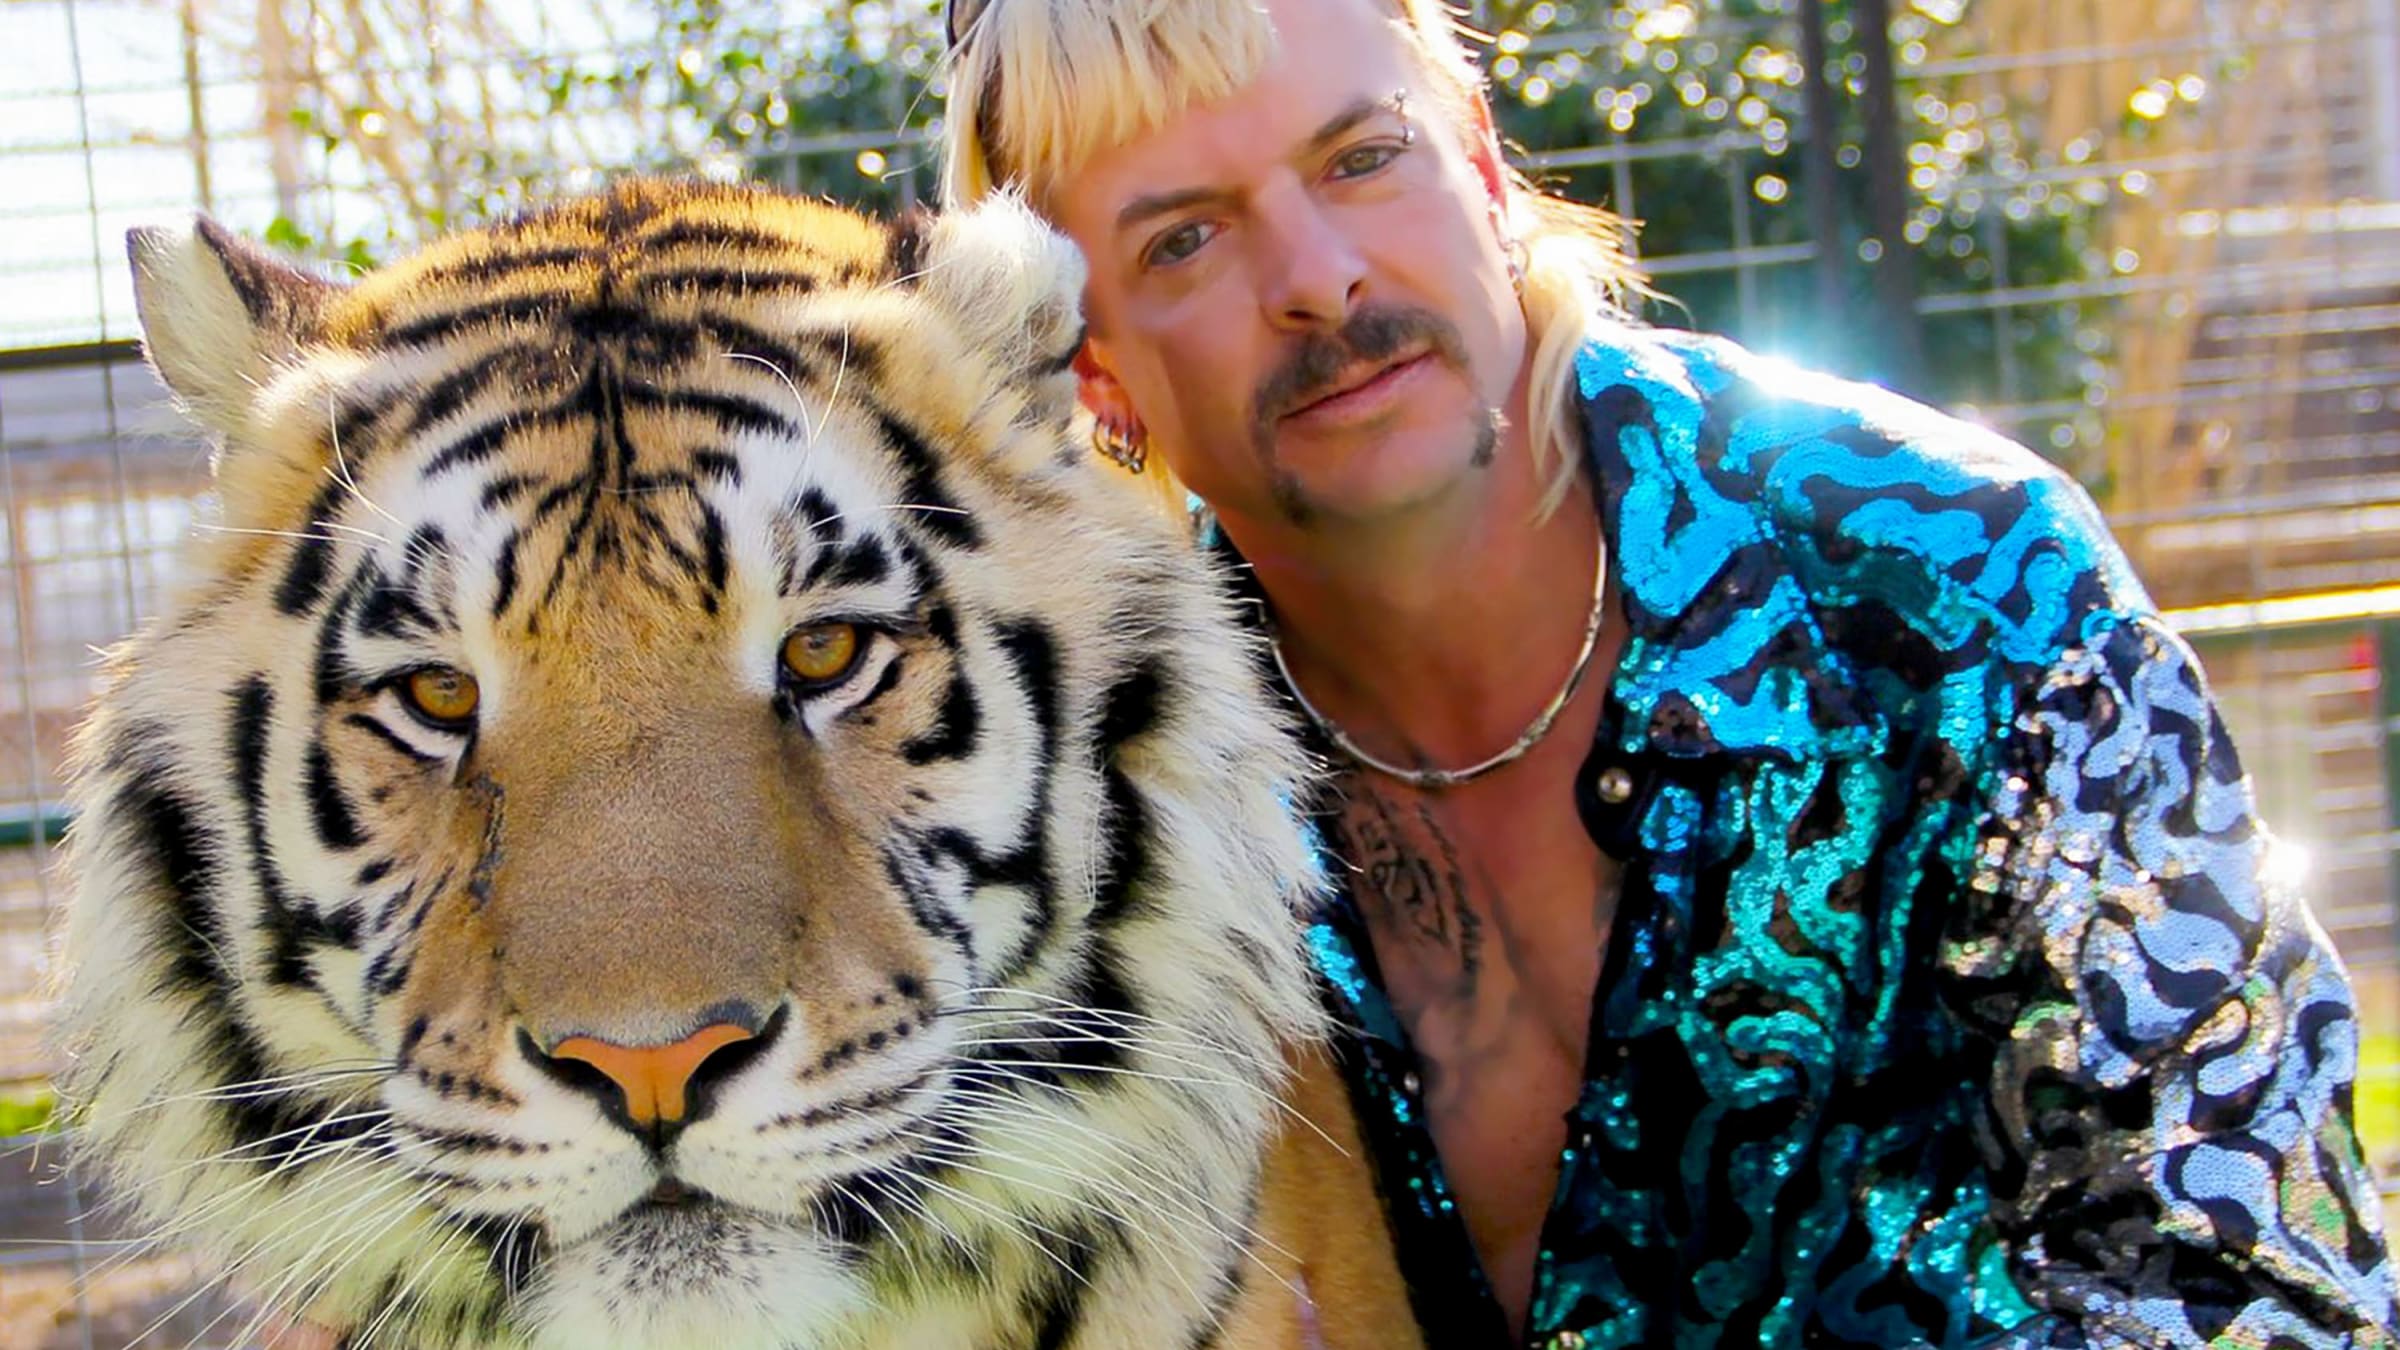 Tiger King Joe Exotic Is Far More Evil Than You Think